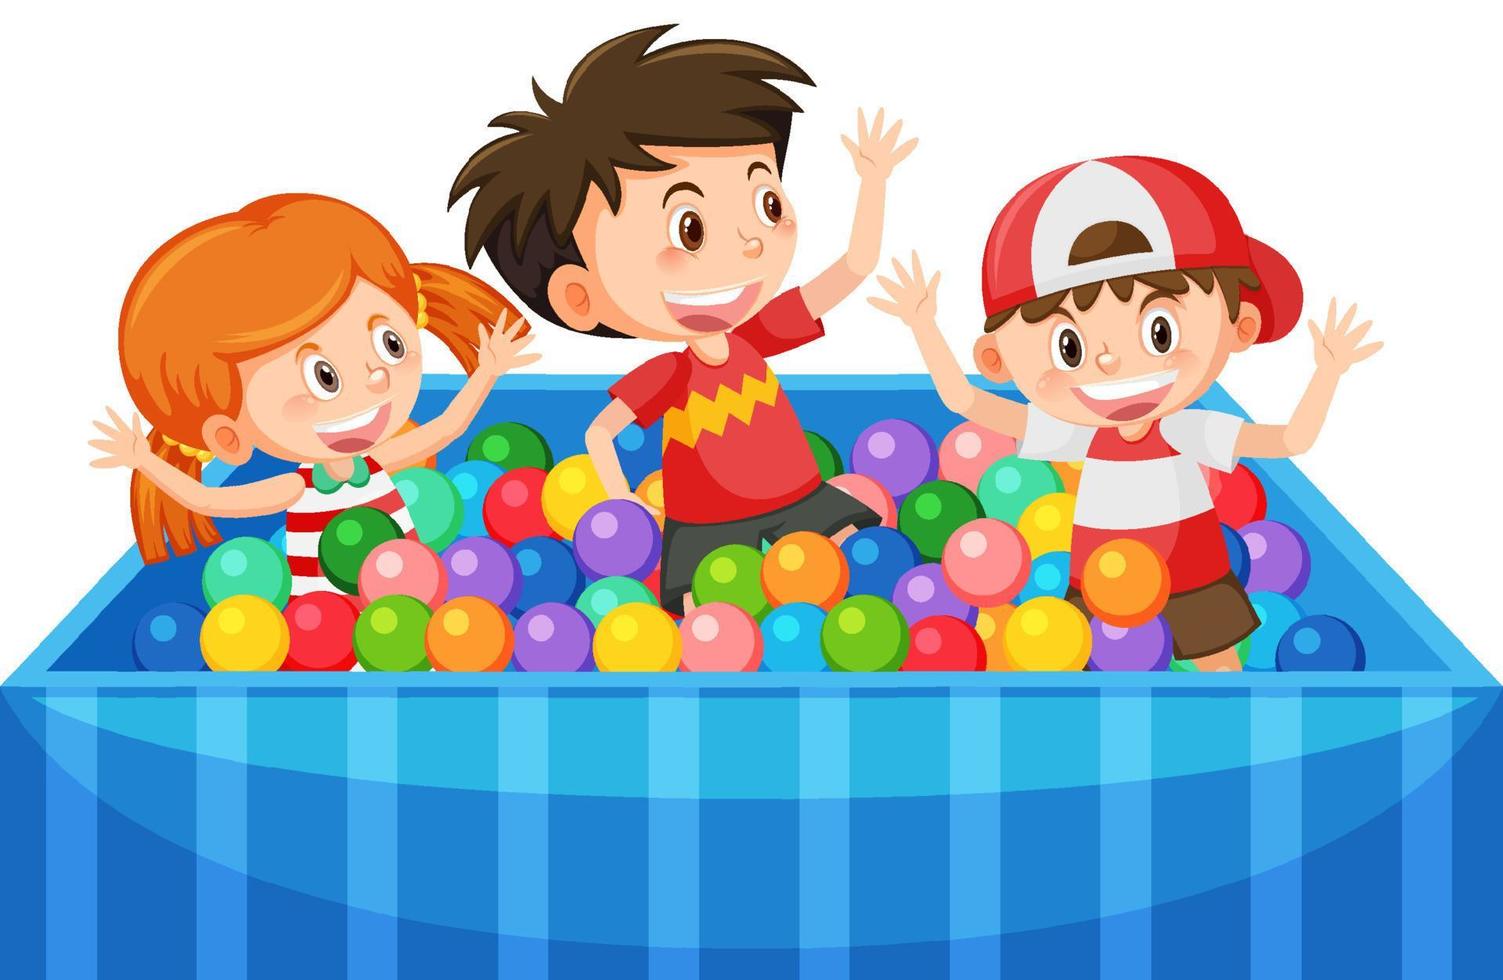 Children playing in the ball pit vector